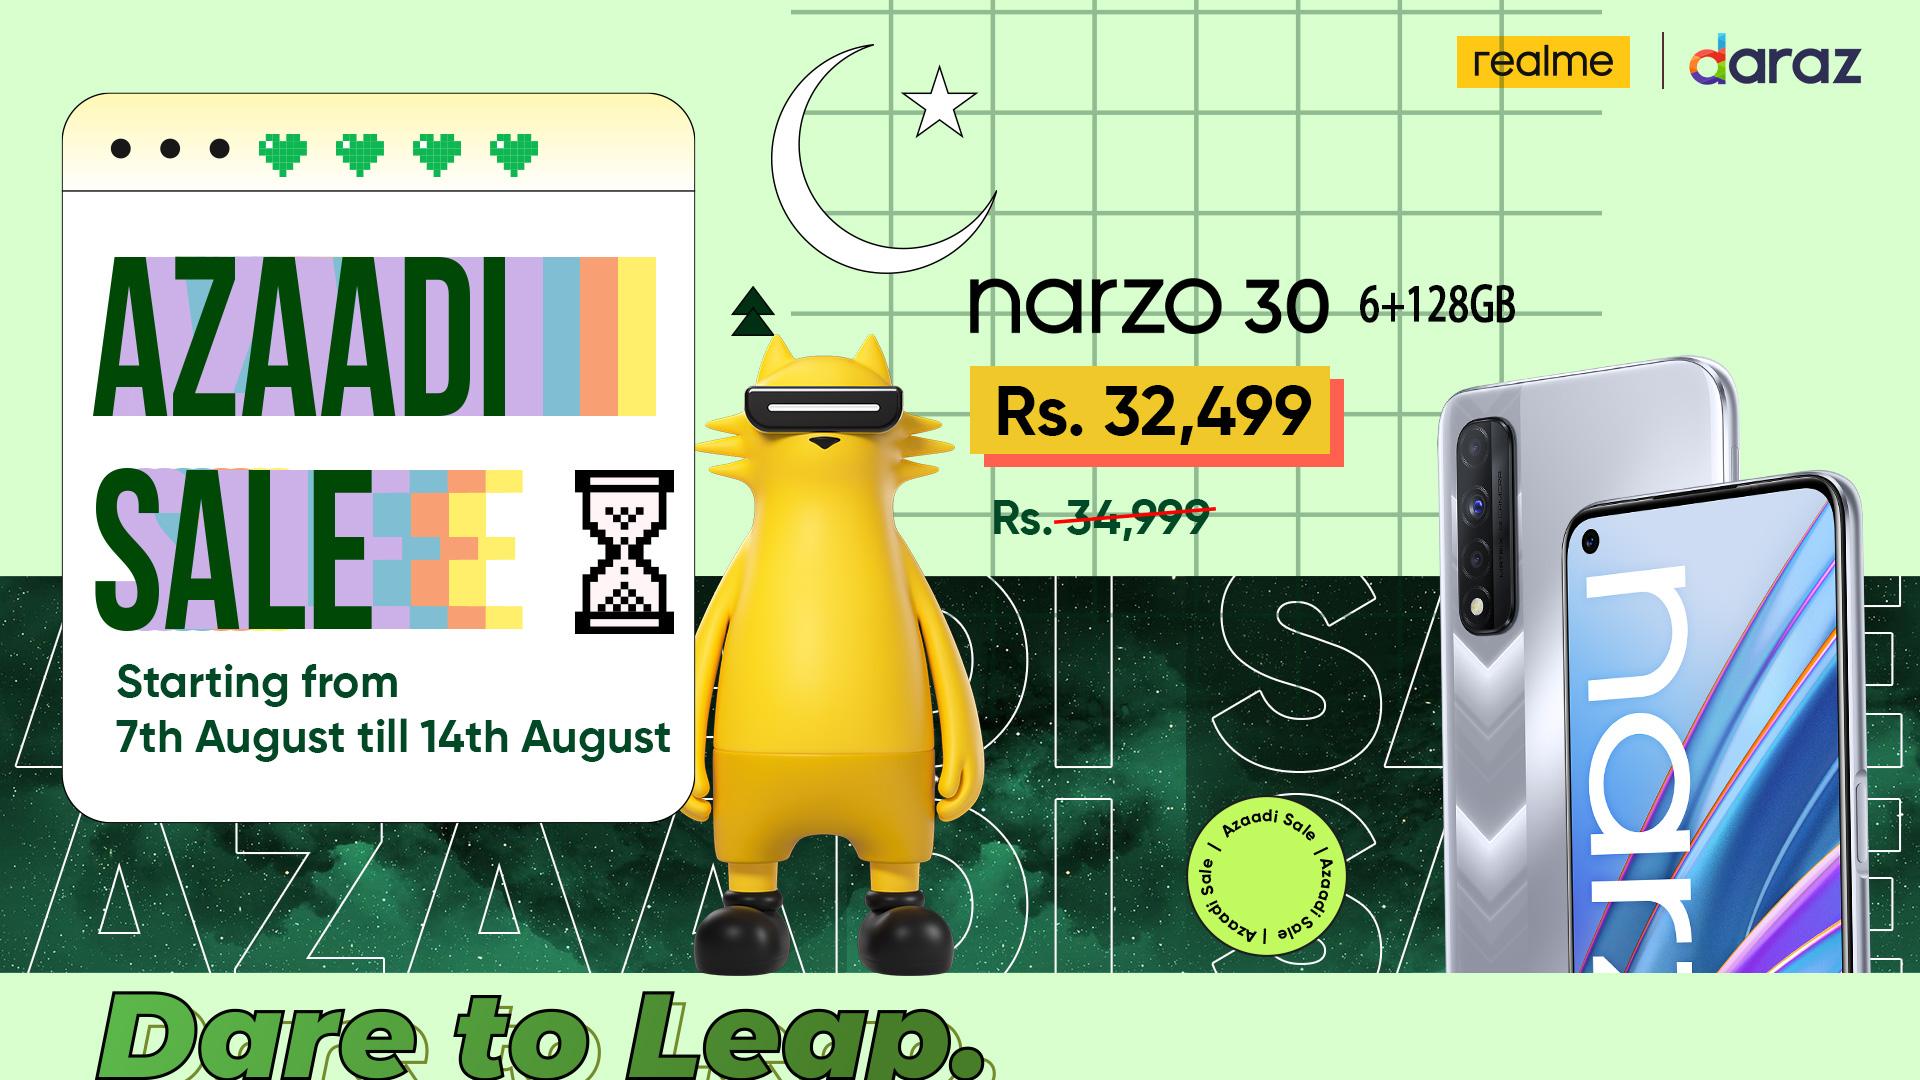 Celebrate real Azaadi with realme Azaadi Sale 2021 with up to 30% in Discounts